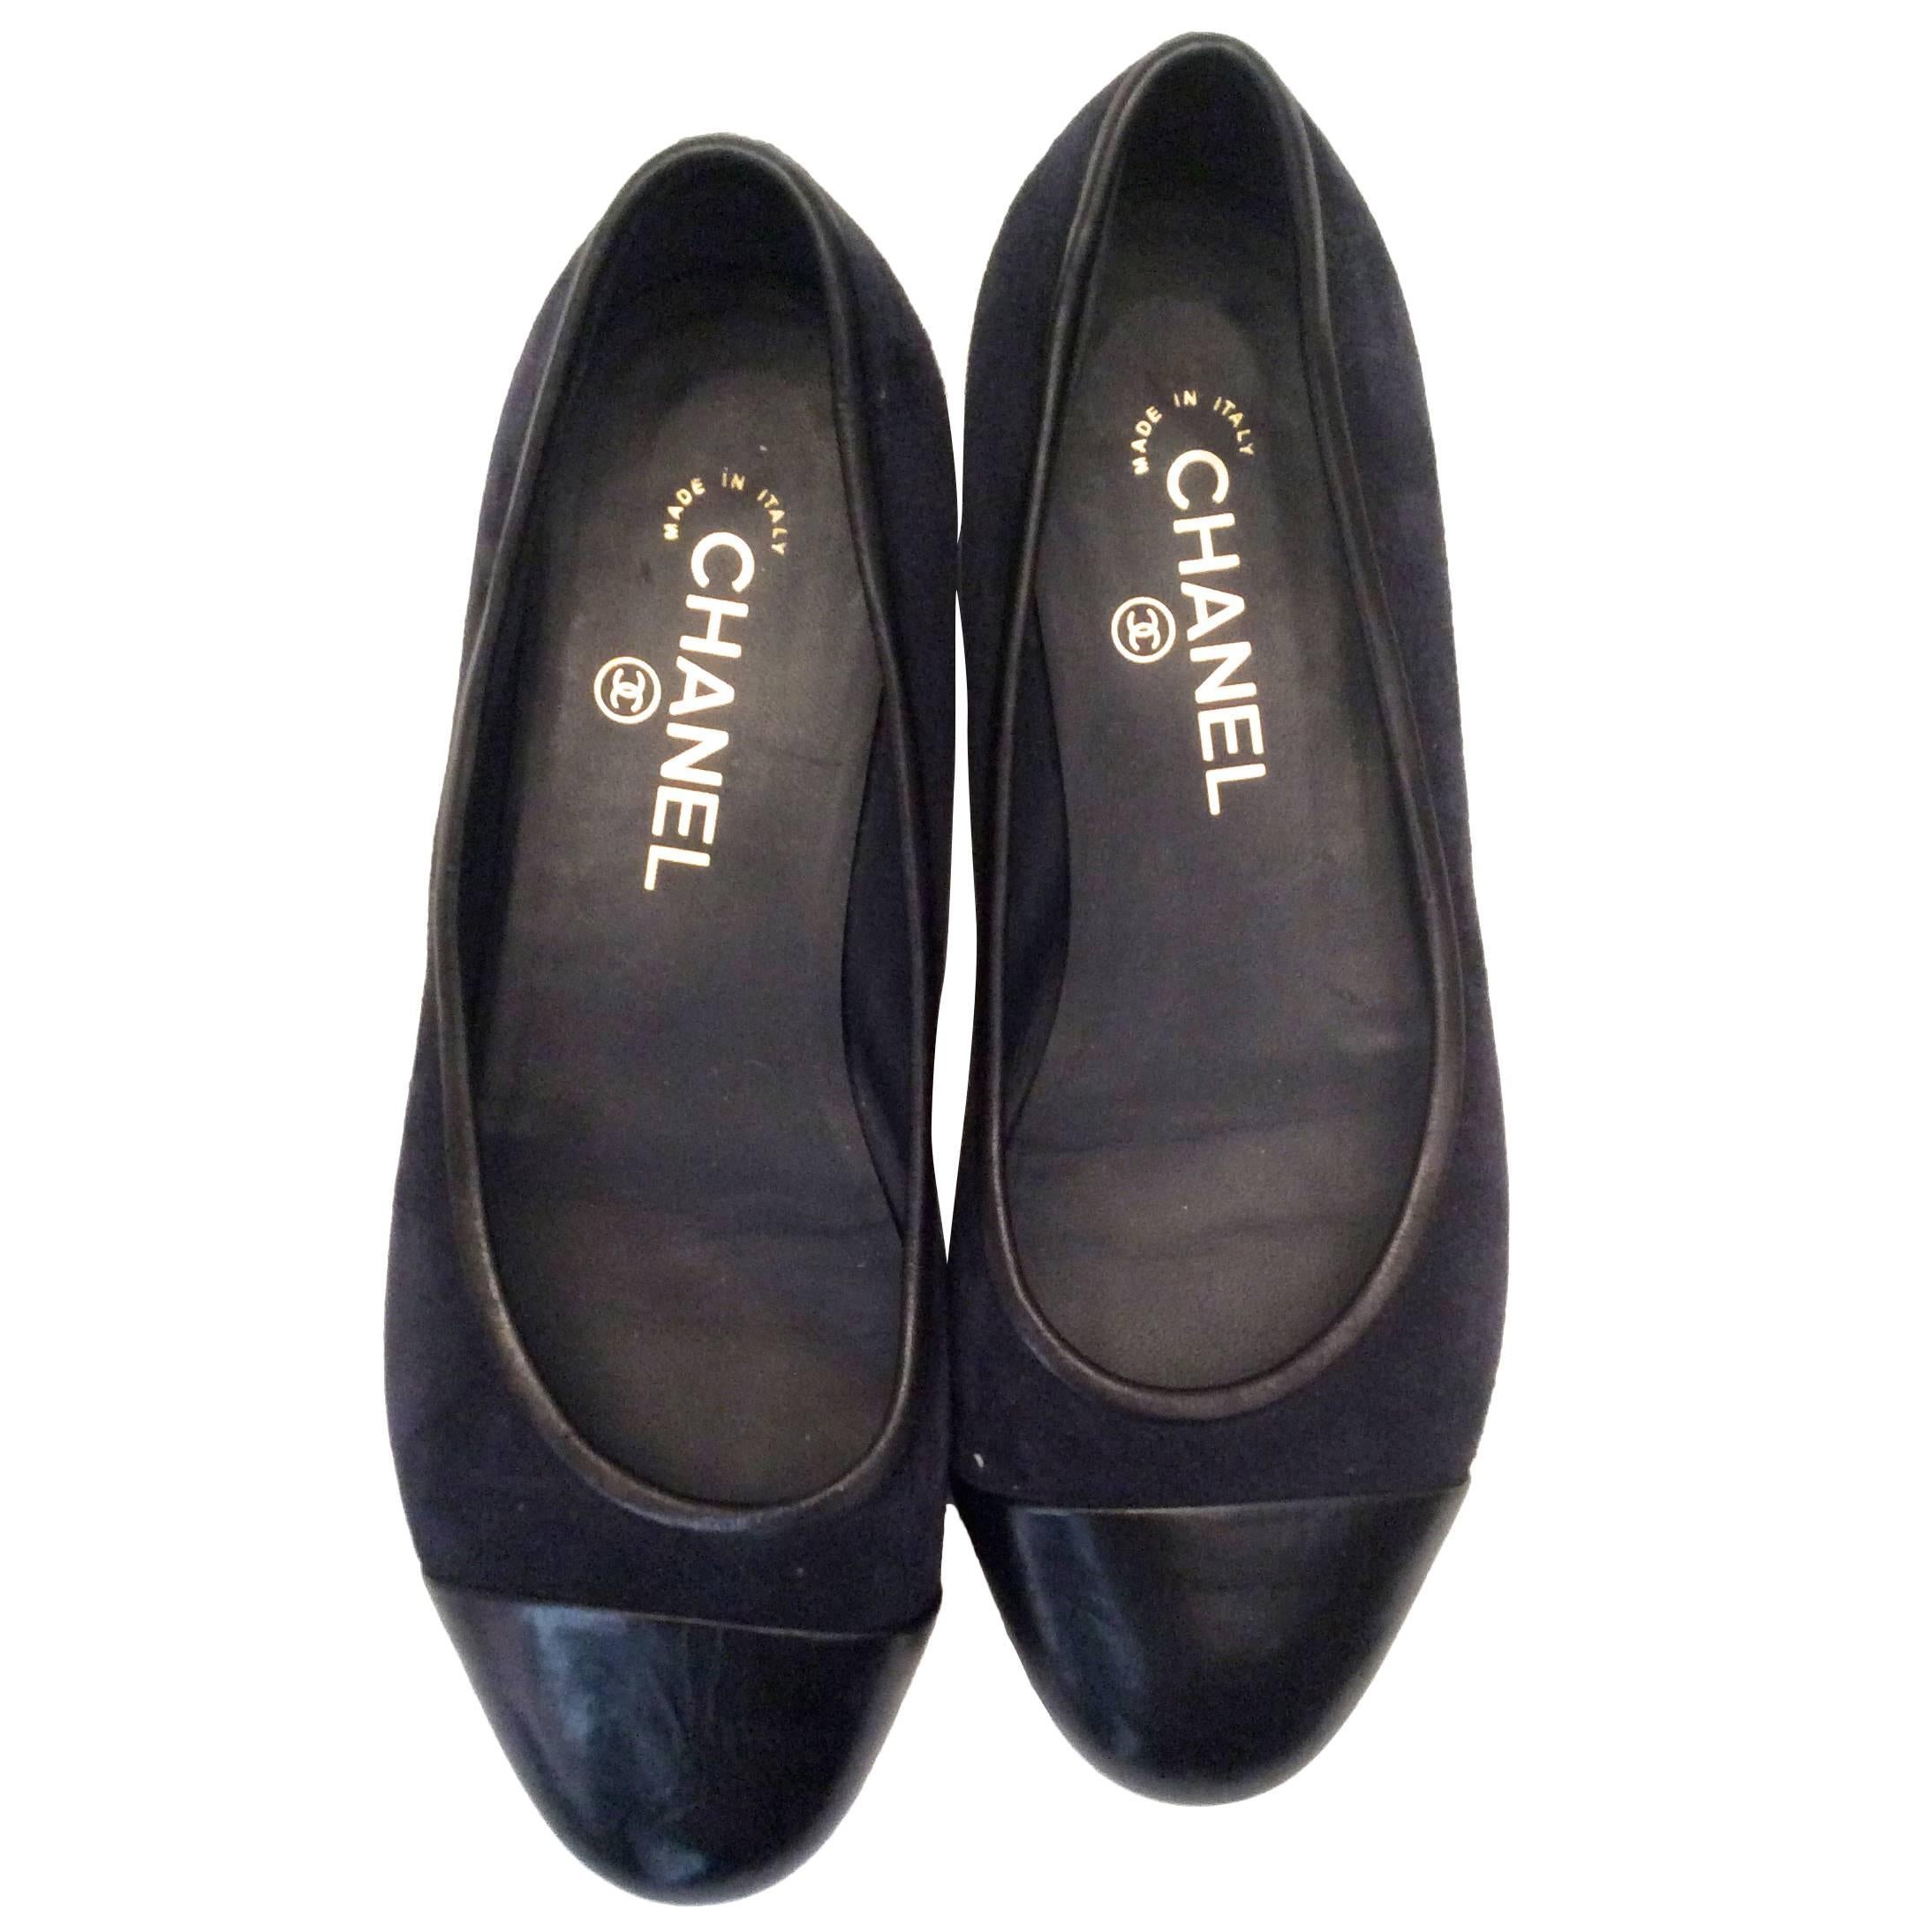 Chanel Ballerina Flats - Blue - Size 38 For Sale